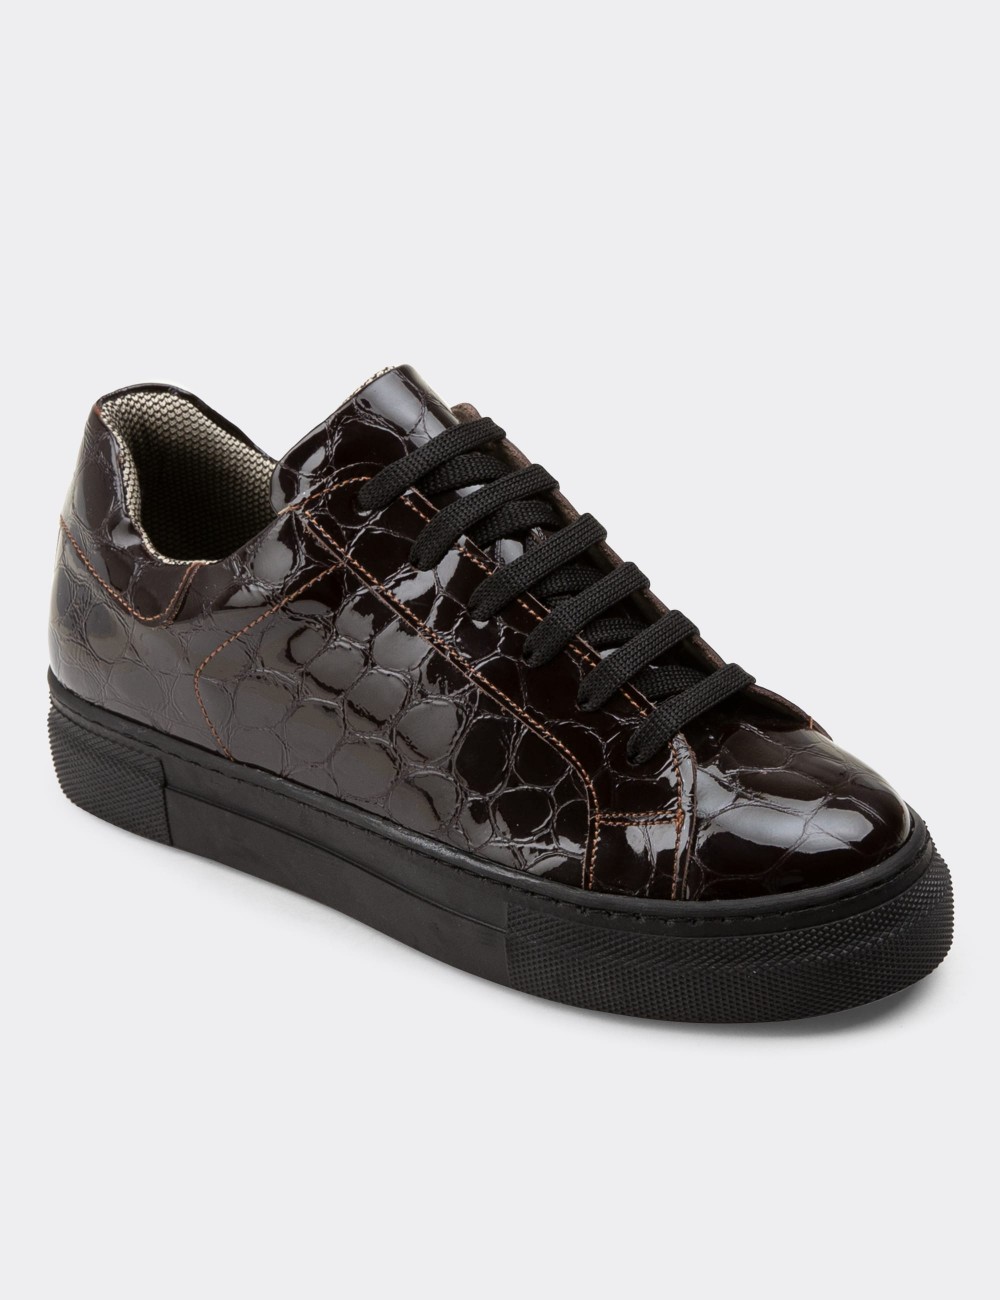 Burgundy Patent Leather Sneakers - Z1681ZBRDC06